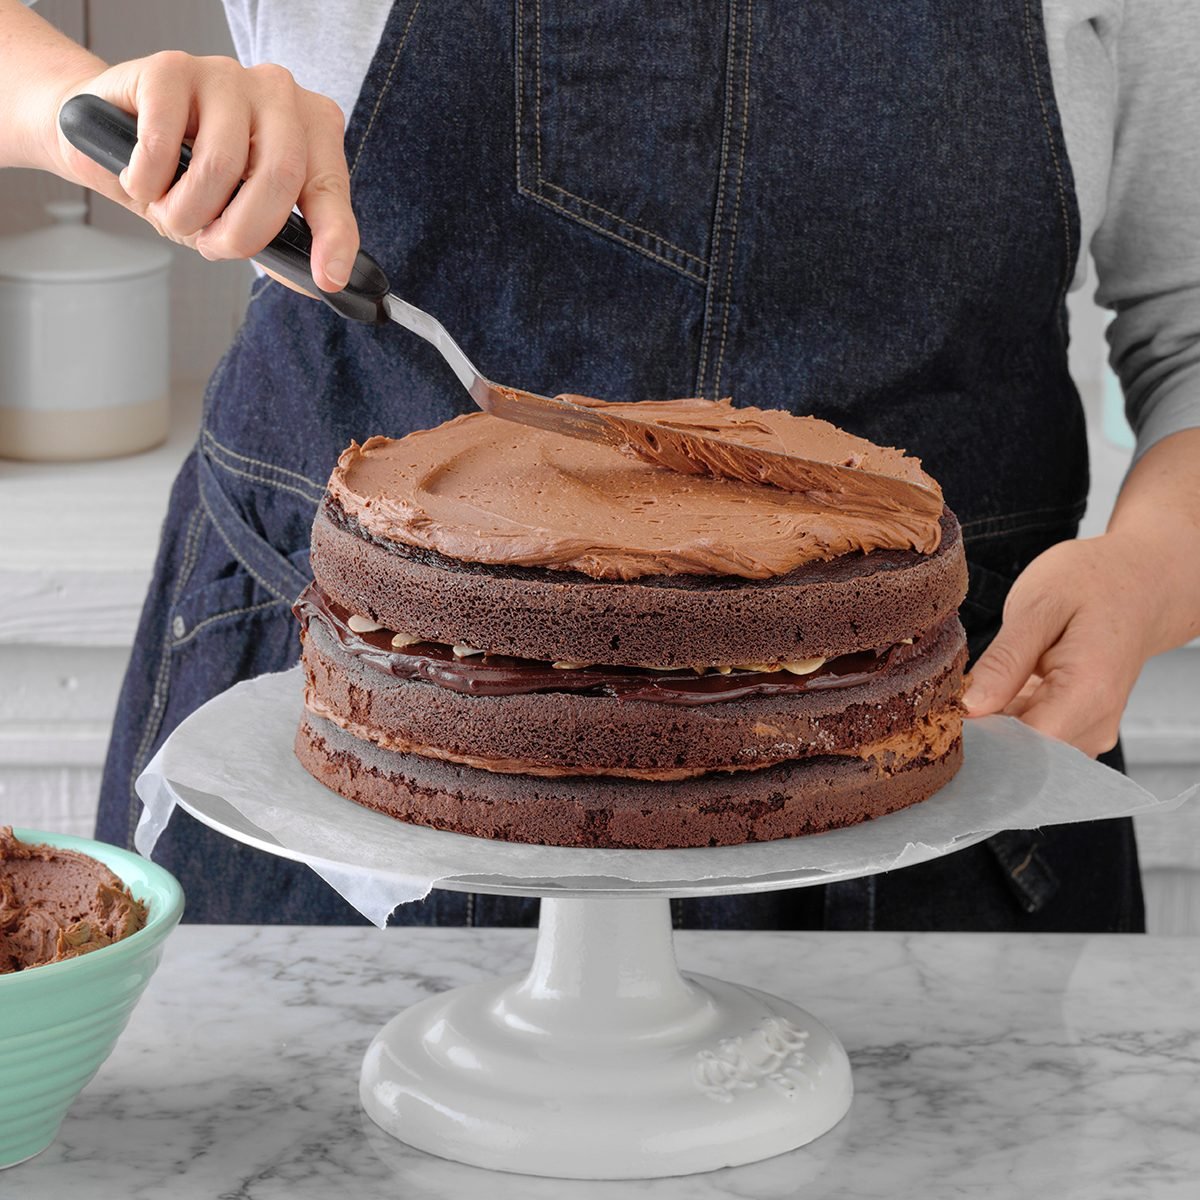 Our Favorite Frosting Tools for Bakery Window-Worthy Cakes